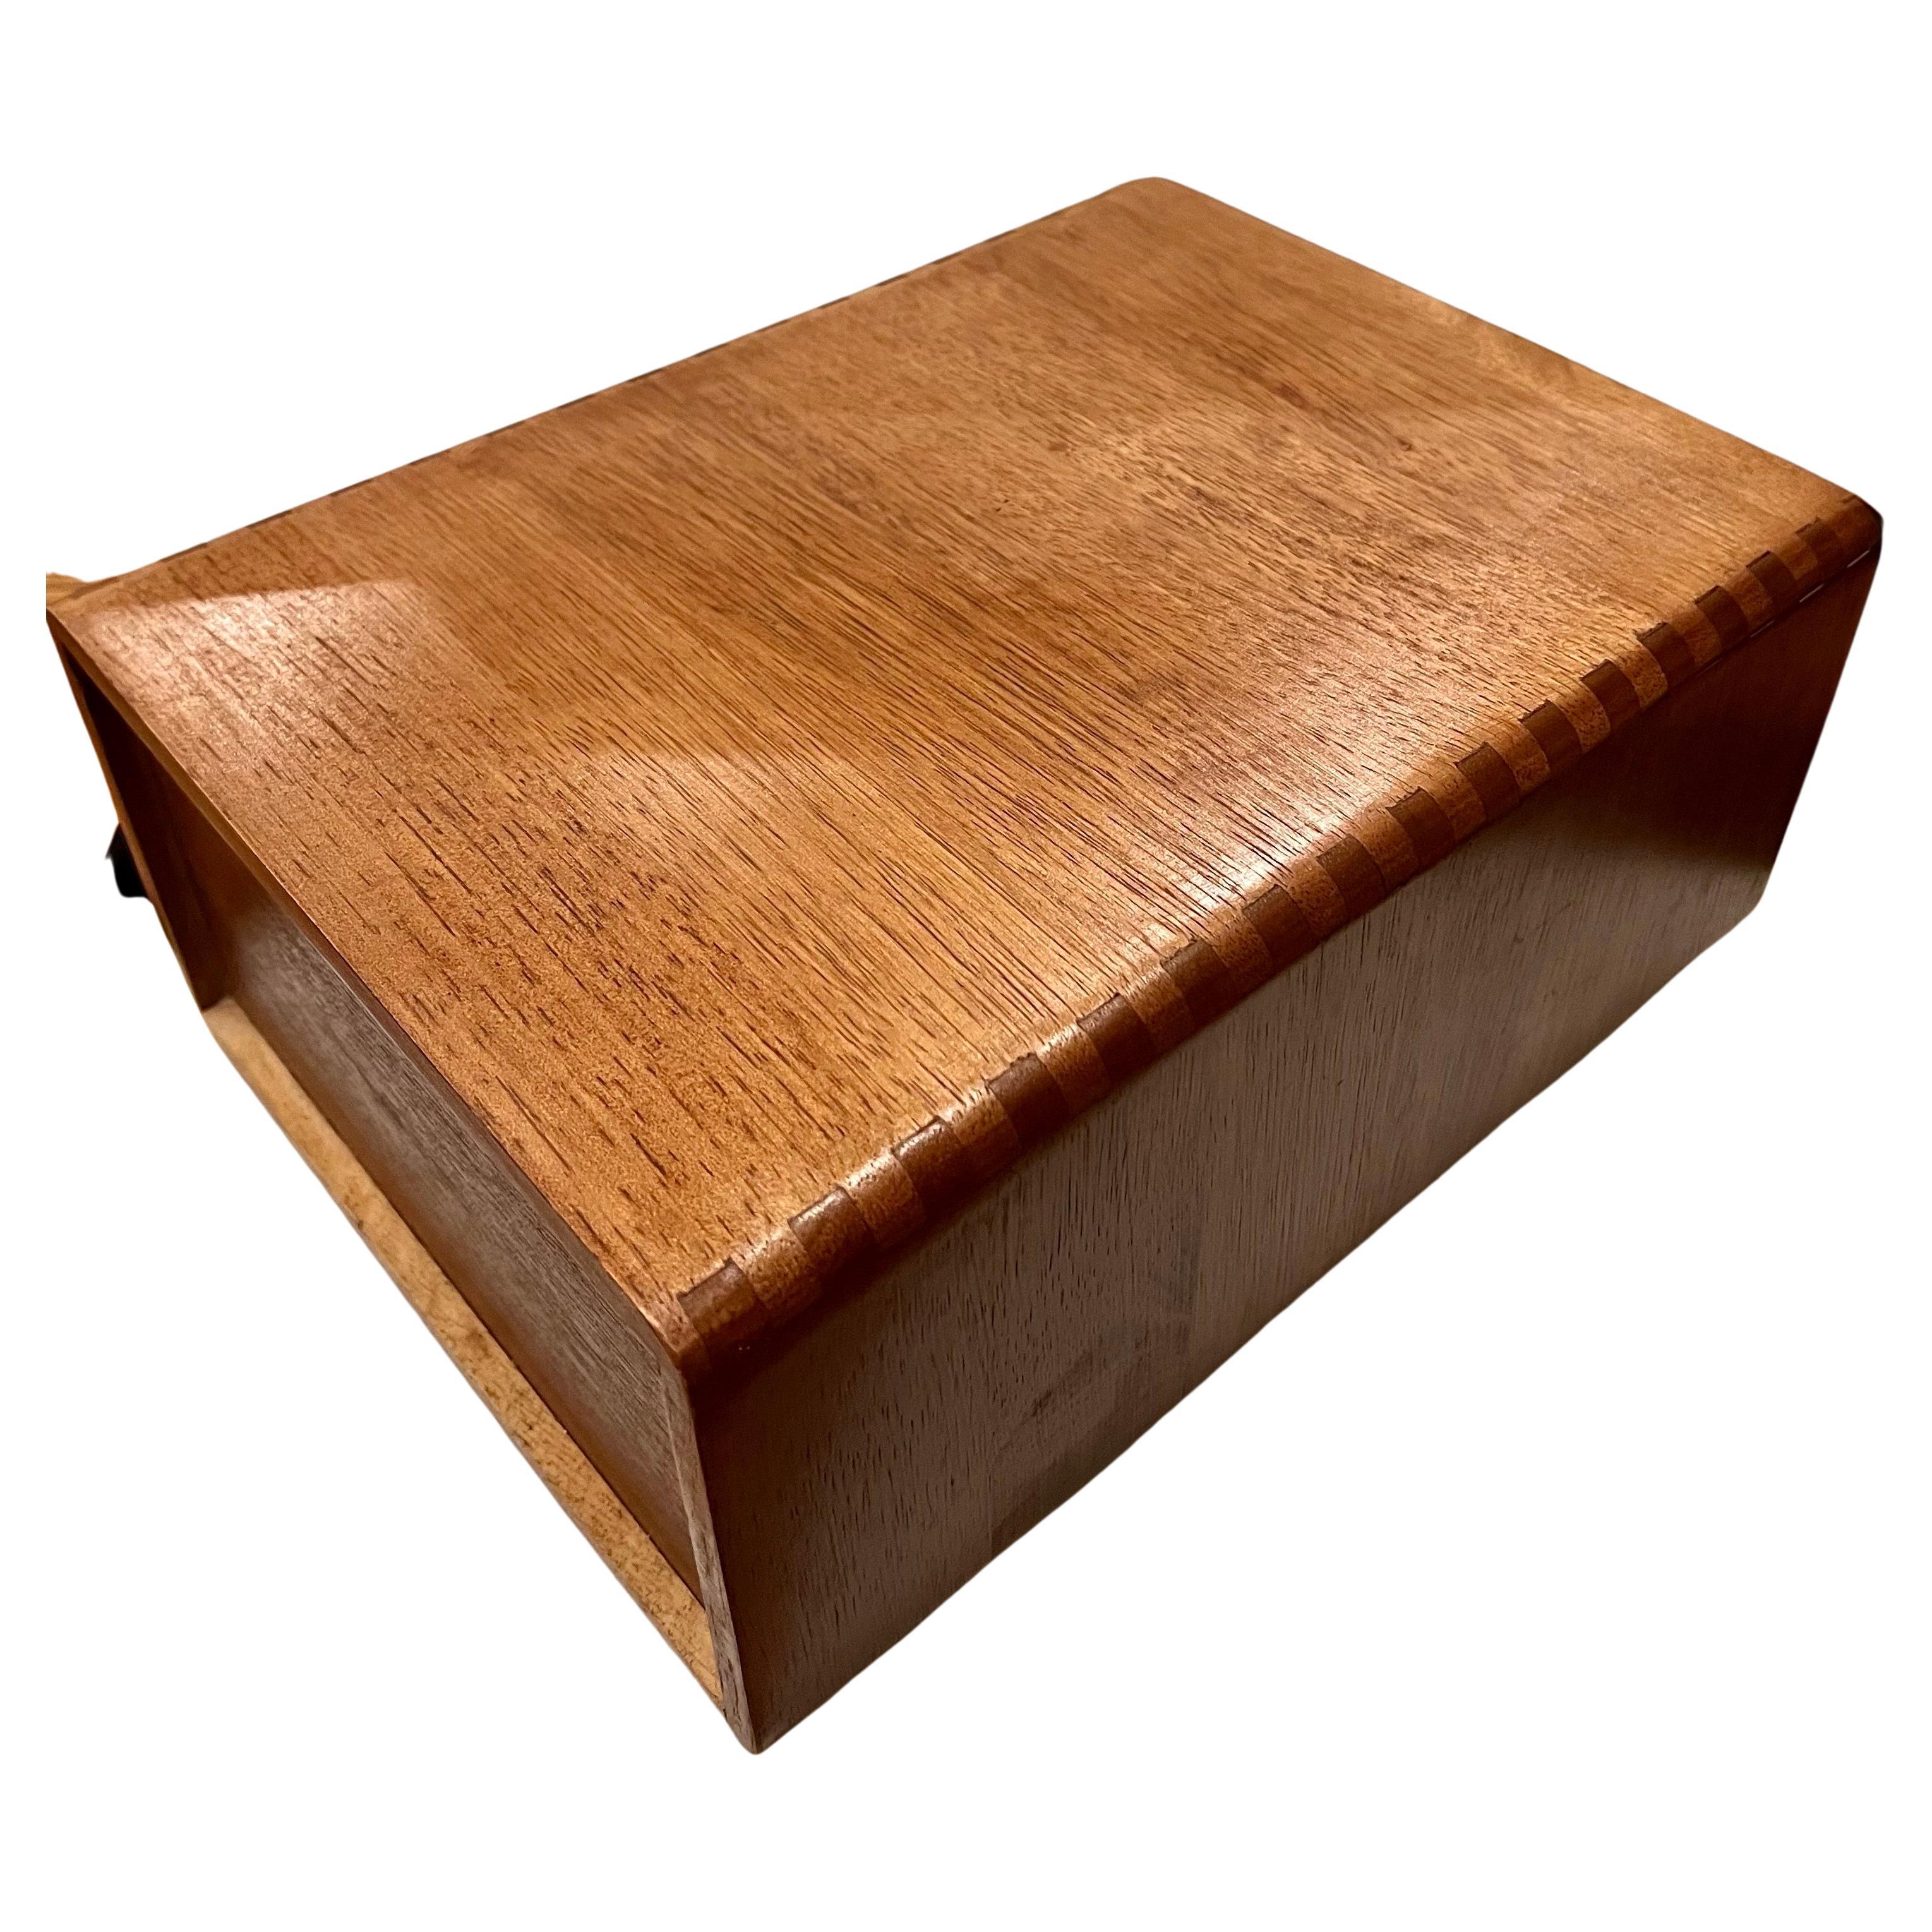 Beautiful handmade solid teak box with drawer, circa 1980s simple and elegant well-made dovetail great quality. with small compartments inside the drawer.